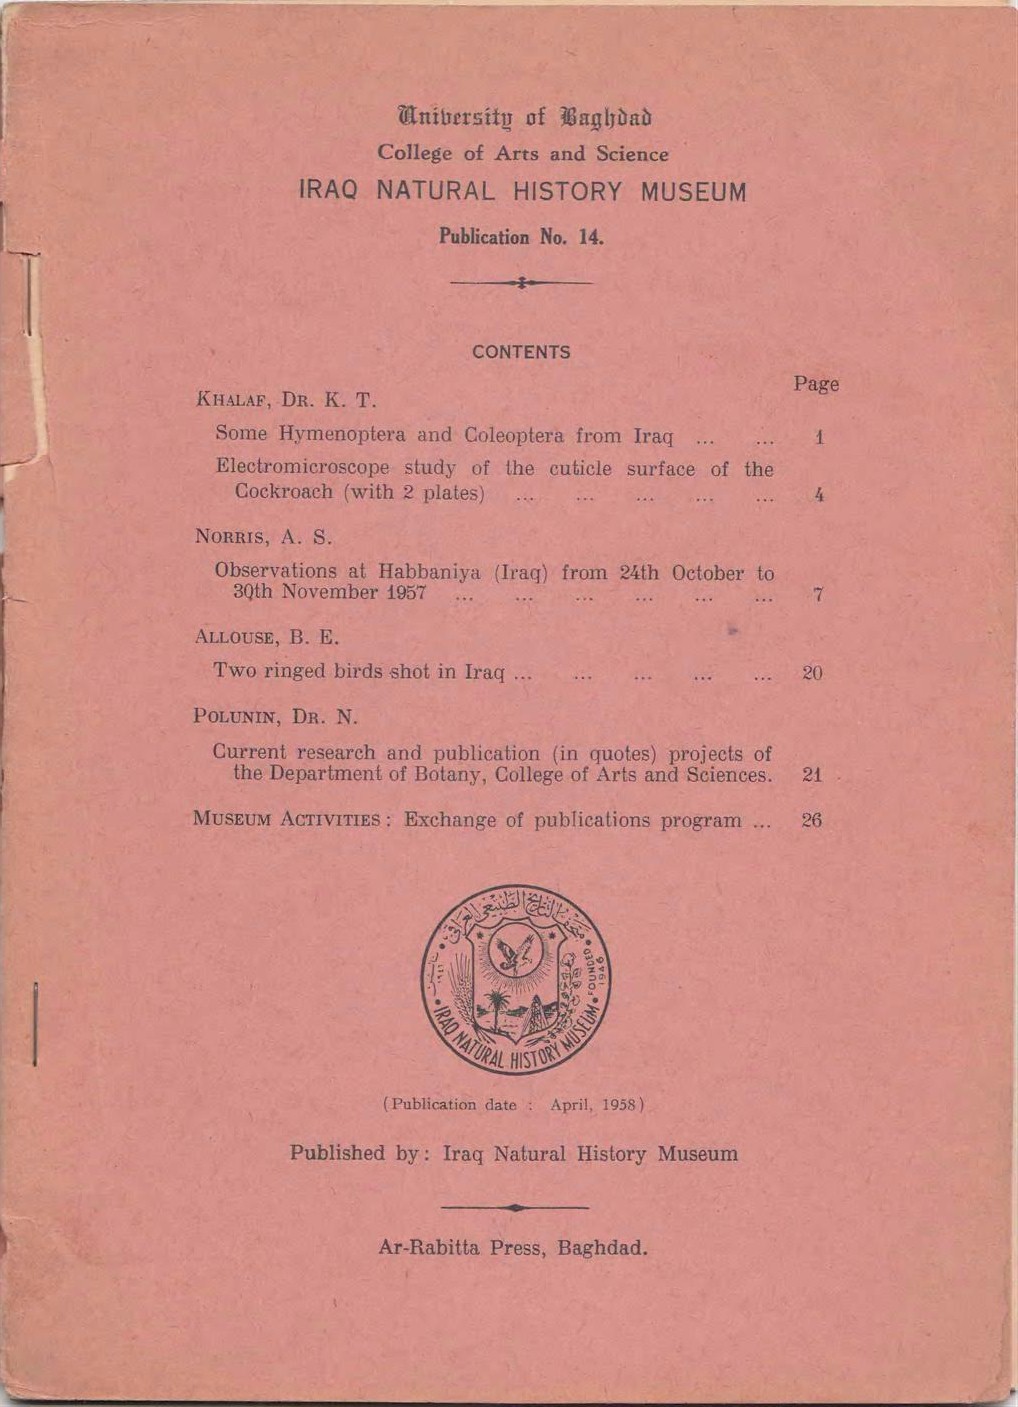 					View No. 14 (1958): Current research and publication (in quotes) projects of  the Department of Botany, College of Arts and Sciences by POLUNIN, DR. N. p;21
				